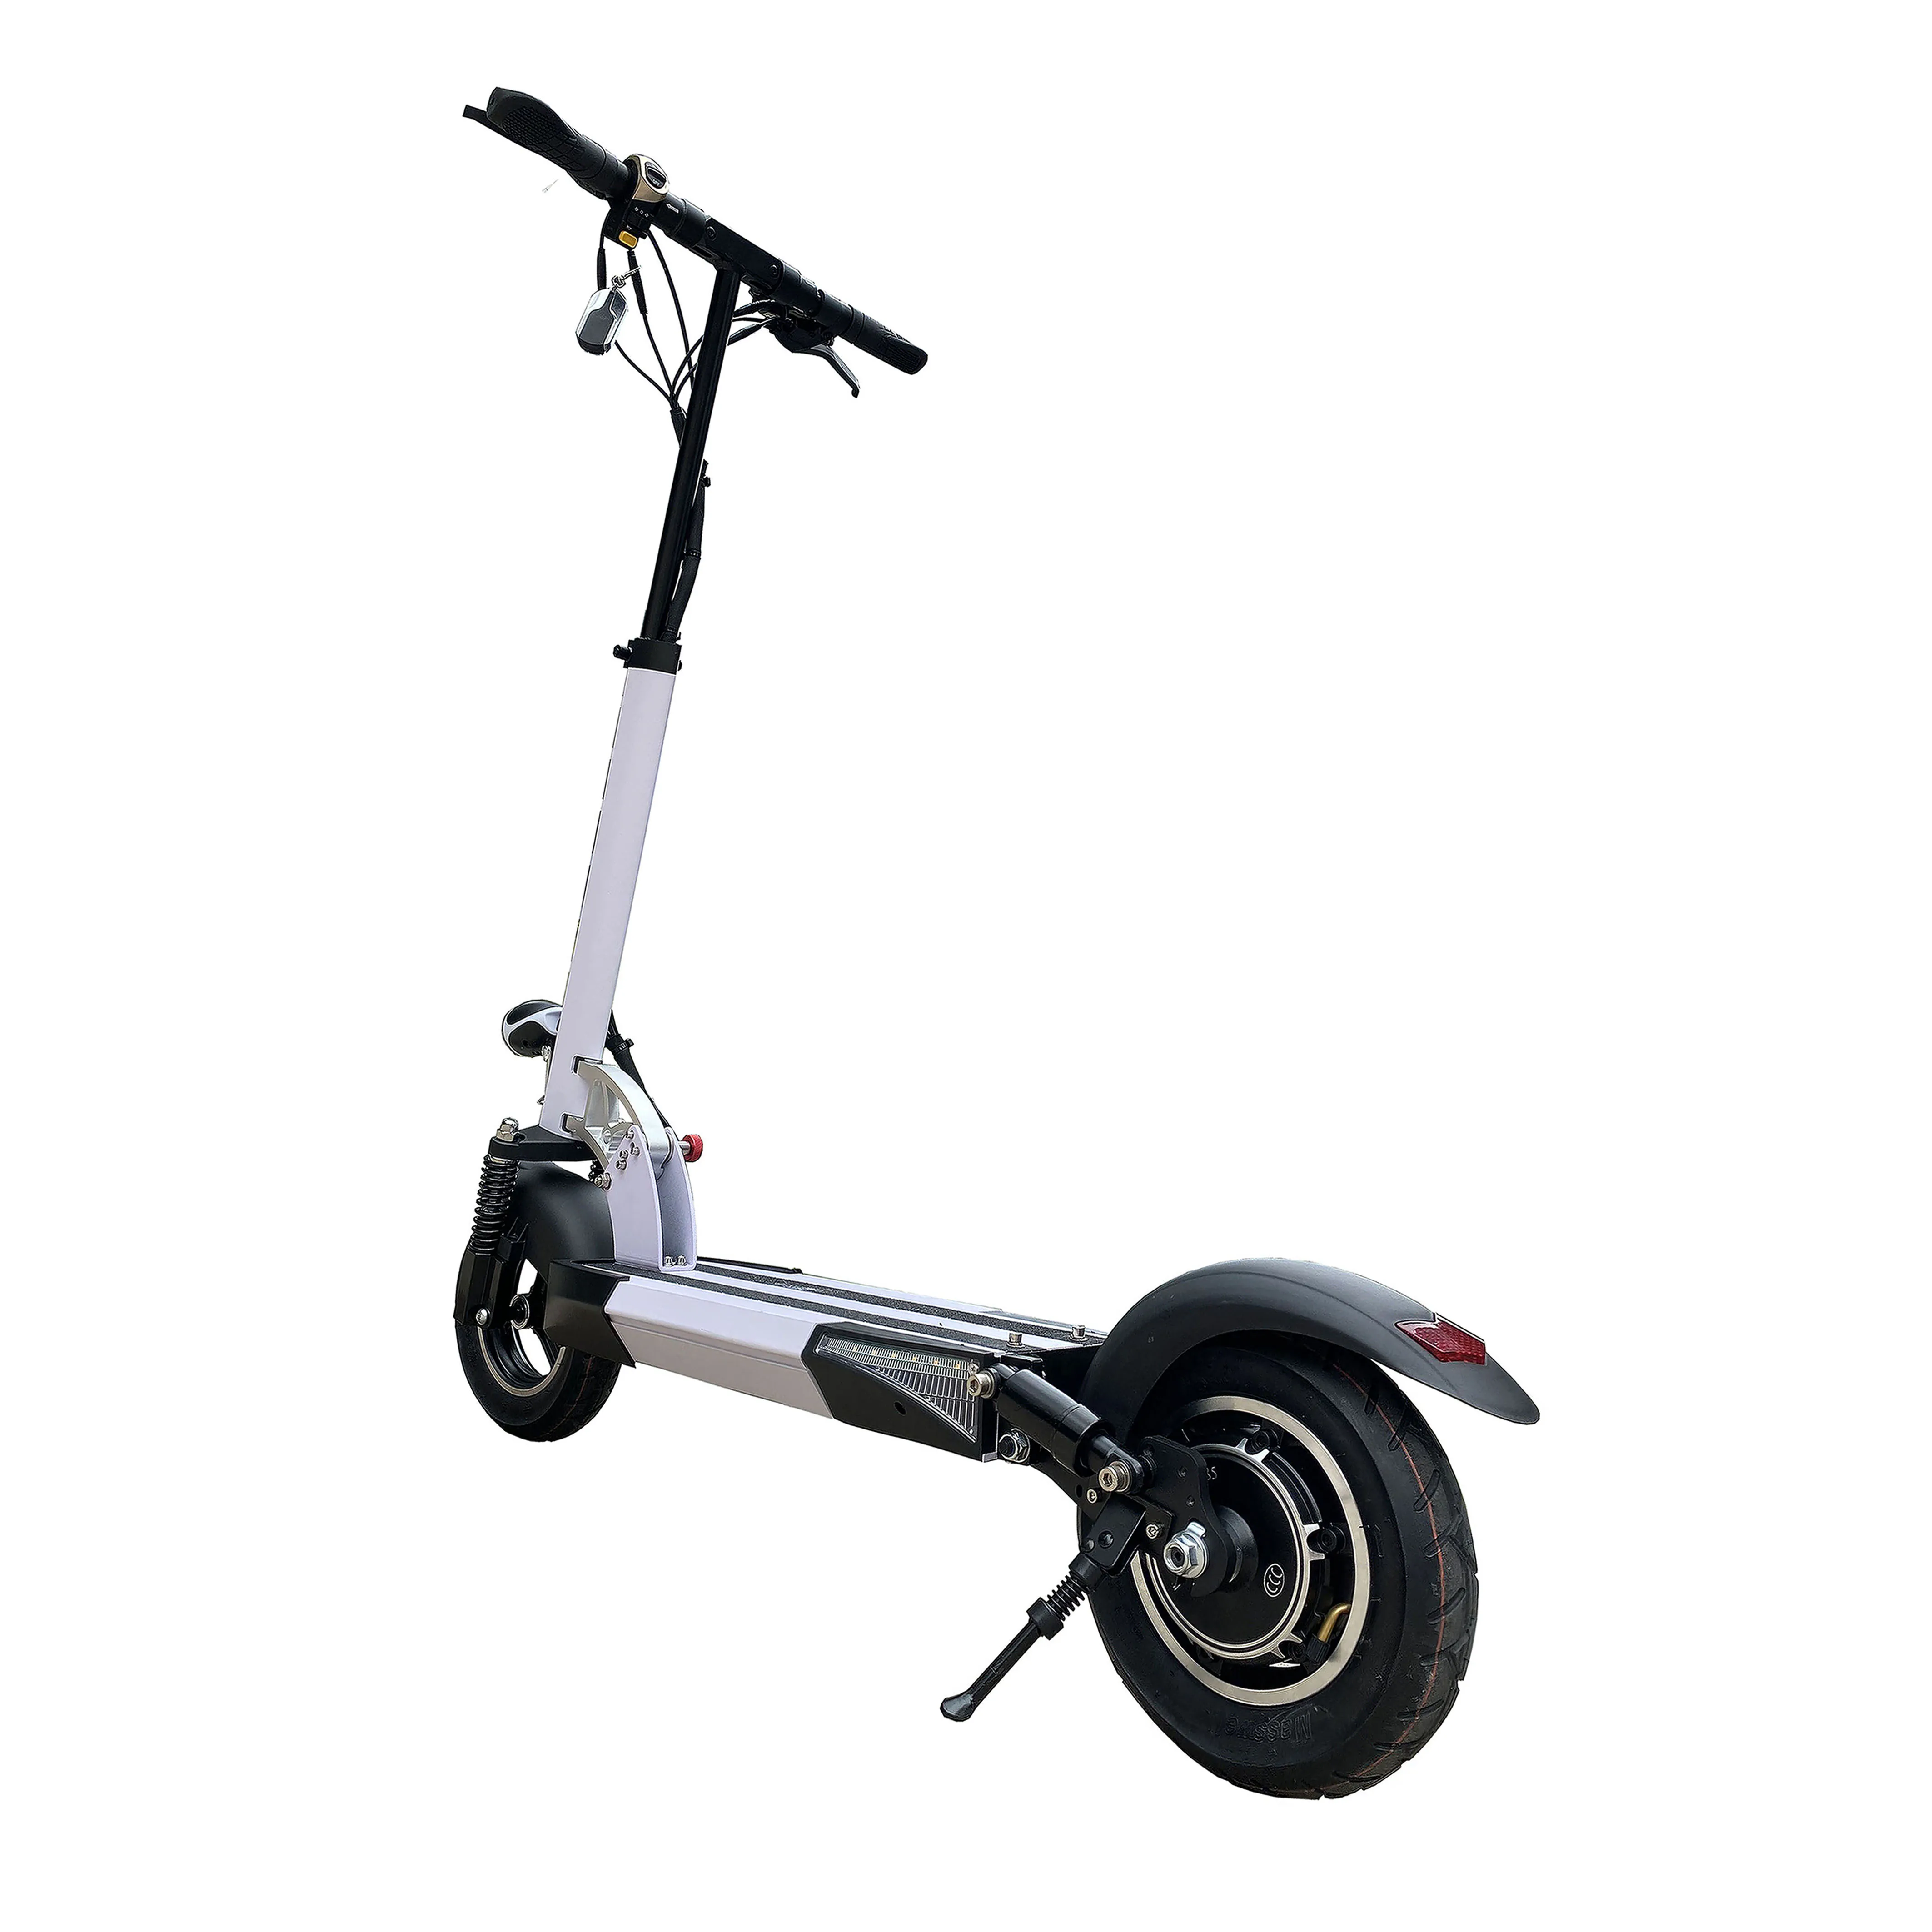 Motherland velstand ru Wholesale Cheap offroad e scooter europe warehouse adult city mi pro carbon  fiber wide fat tyre 72v evercross electric motorcycle scooter From  m.alibaba.com